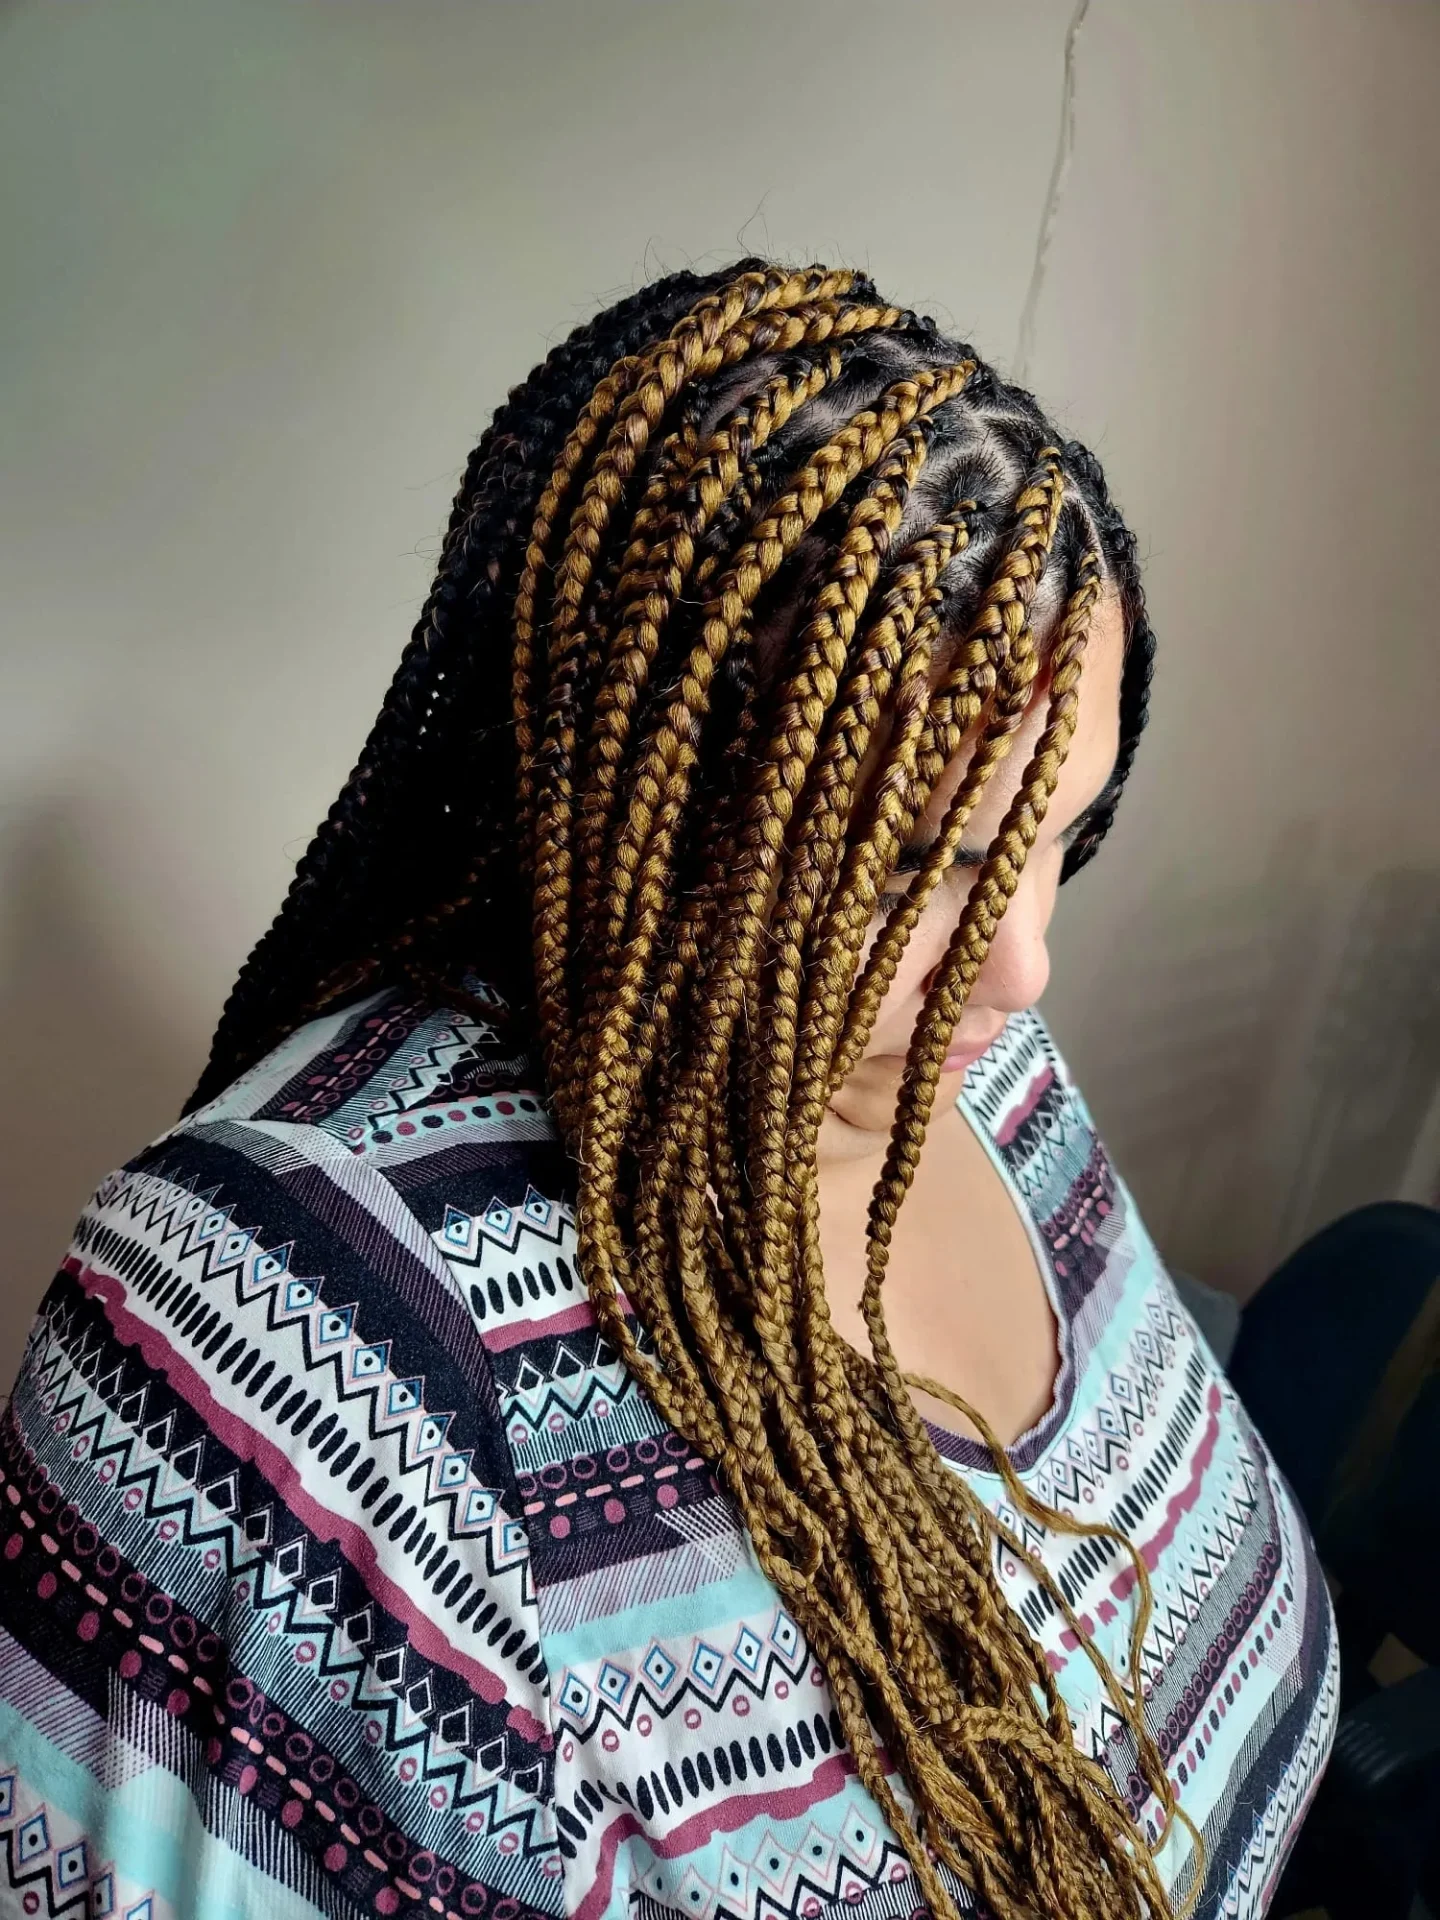 The Braiding and Beauty Empire